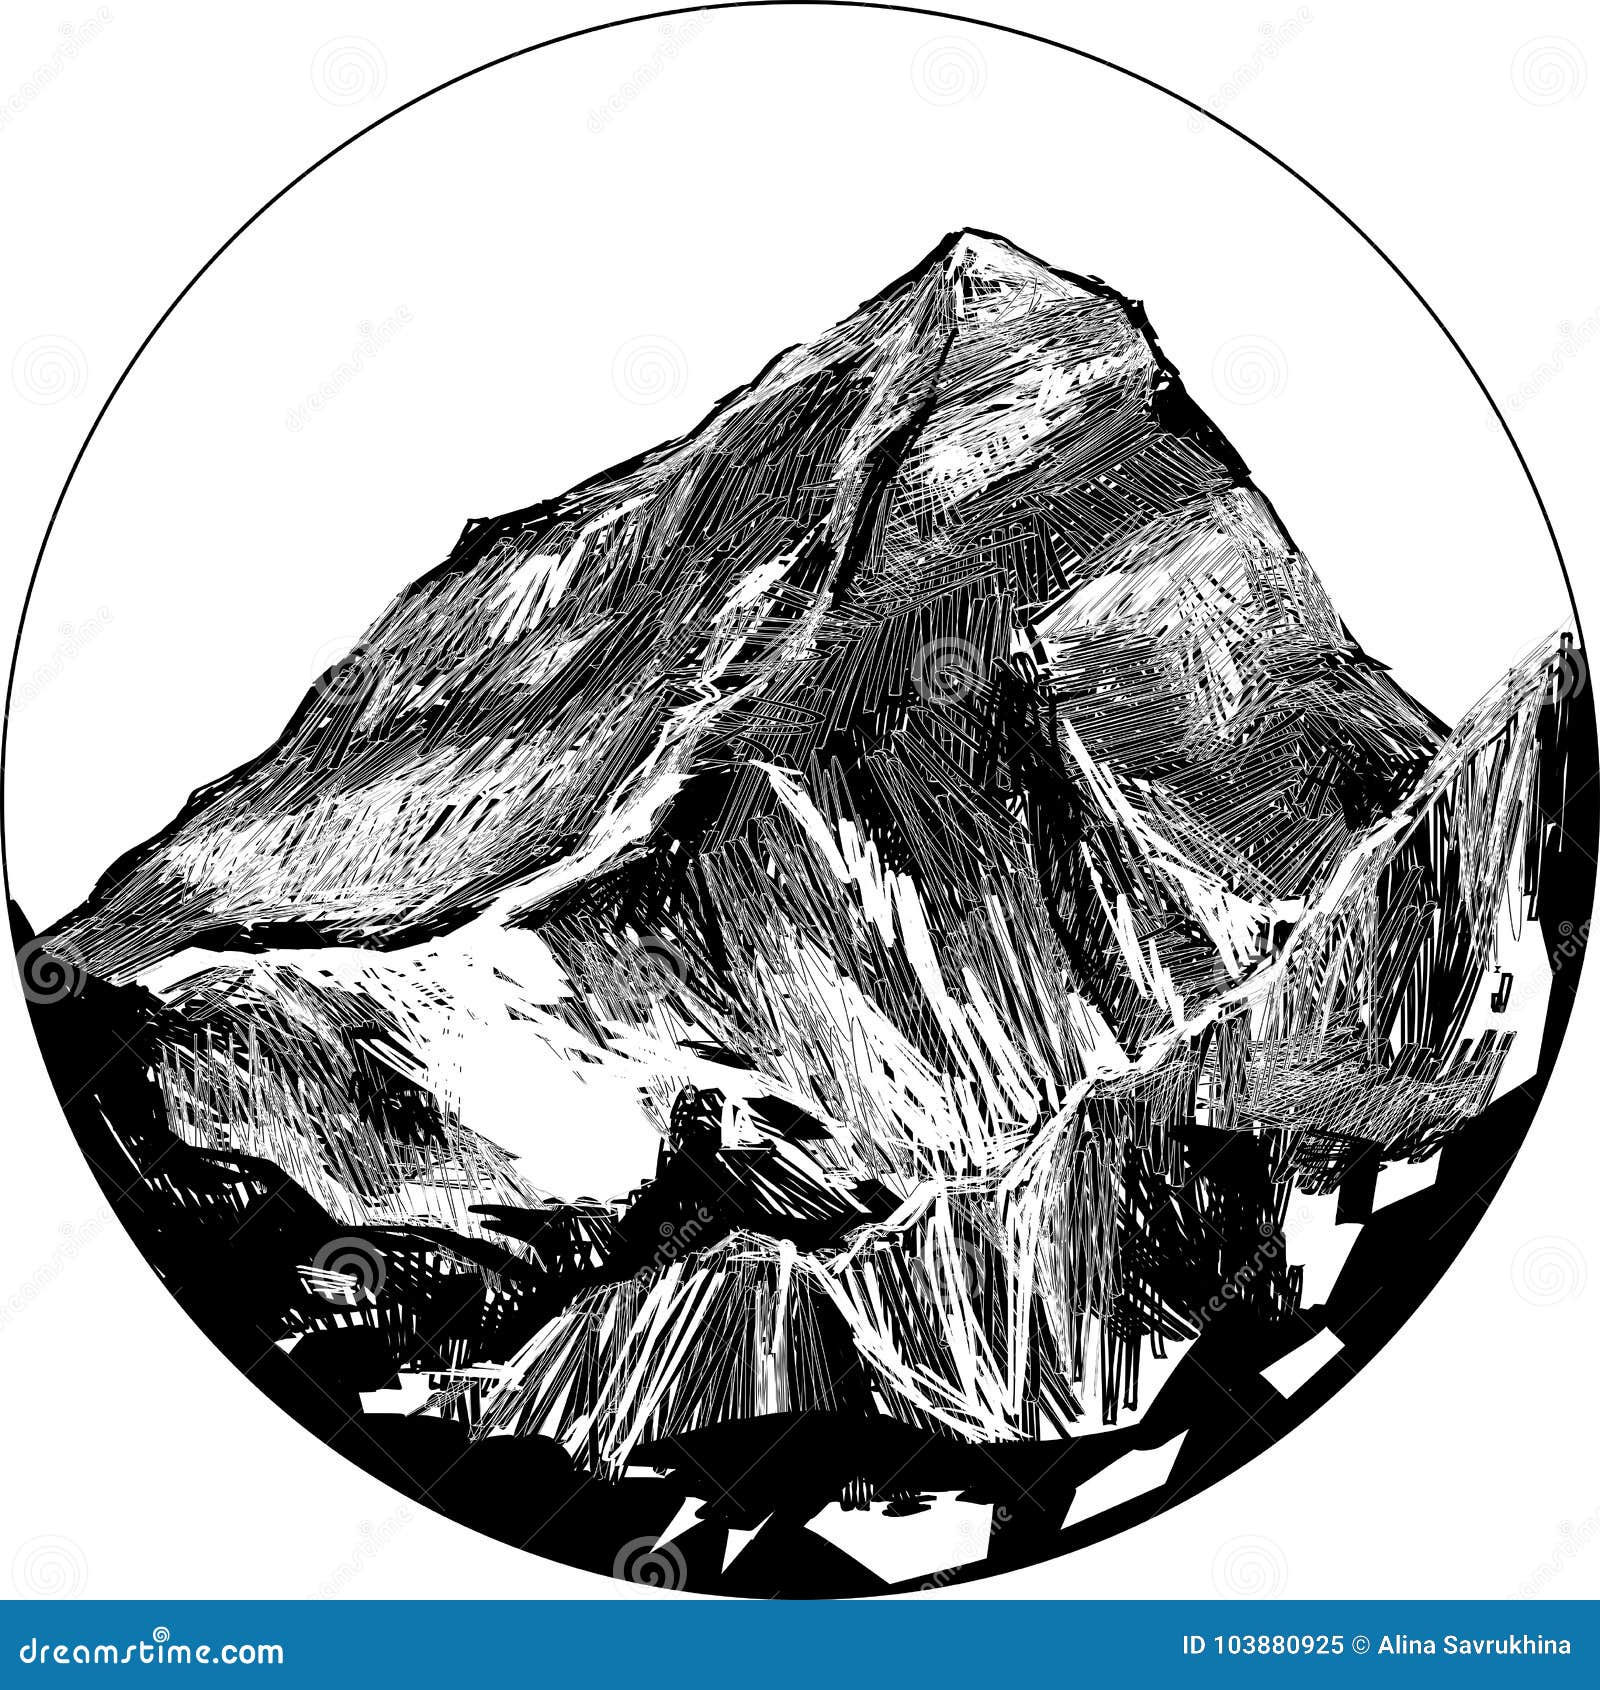 Buy Mount Everest Showing the South Col Route. Line Illustration Showing  All the Key Landmarks and Locations of Camps. Online in India - Etsy